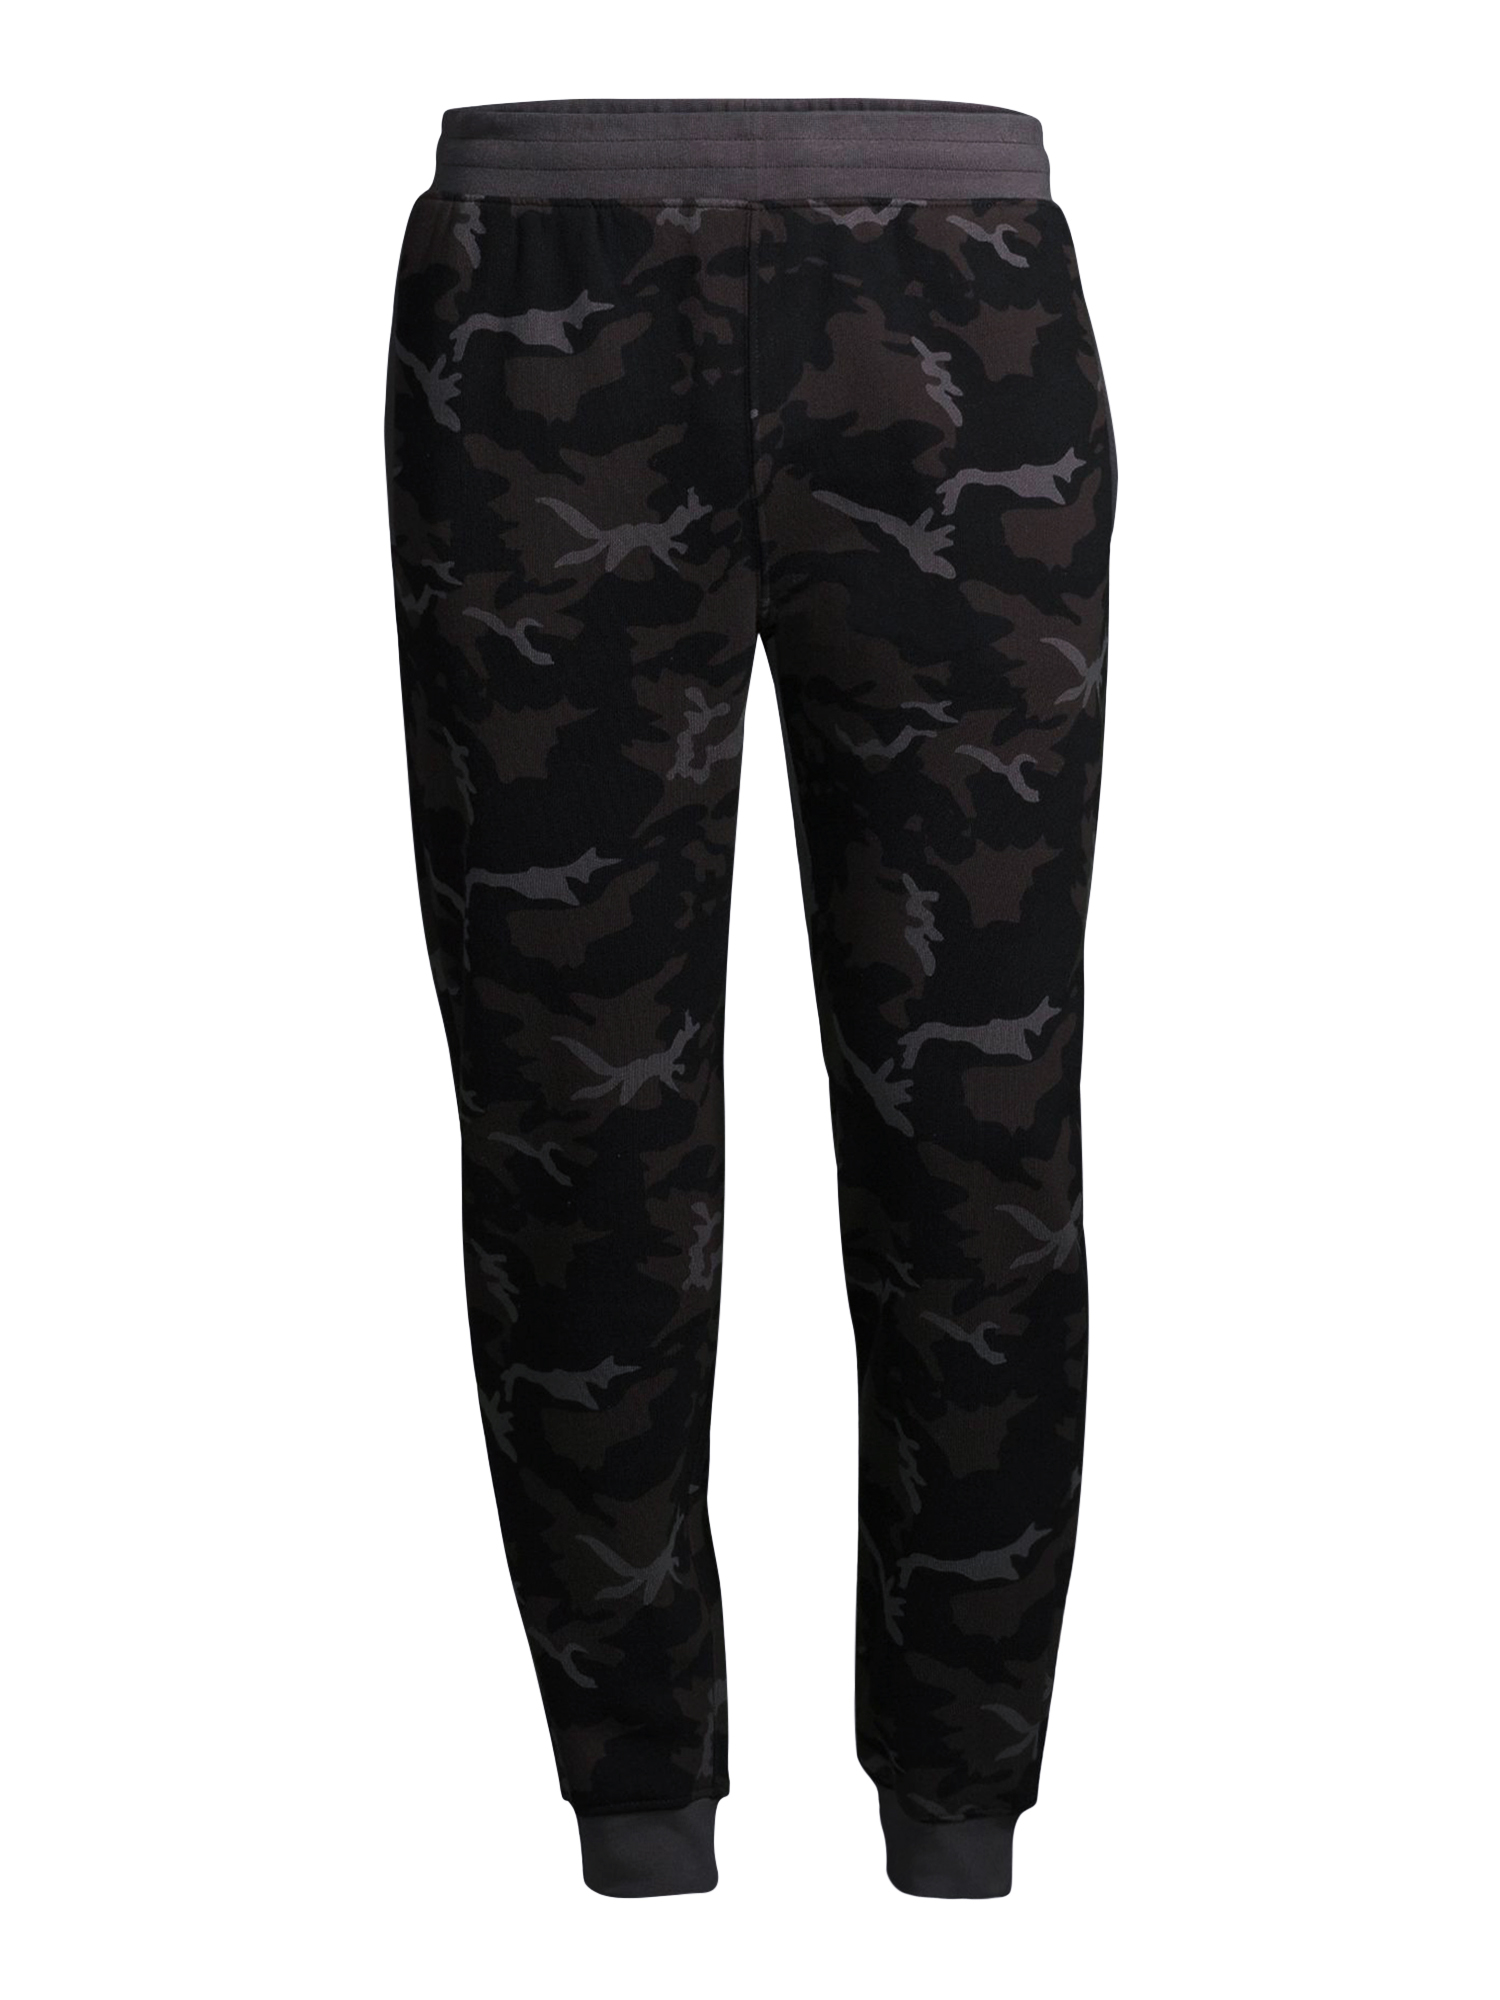 Free Assembly Men's Everyday Fleece Pant - Jogger - image 5 of 6